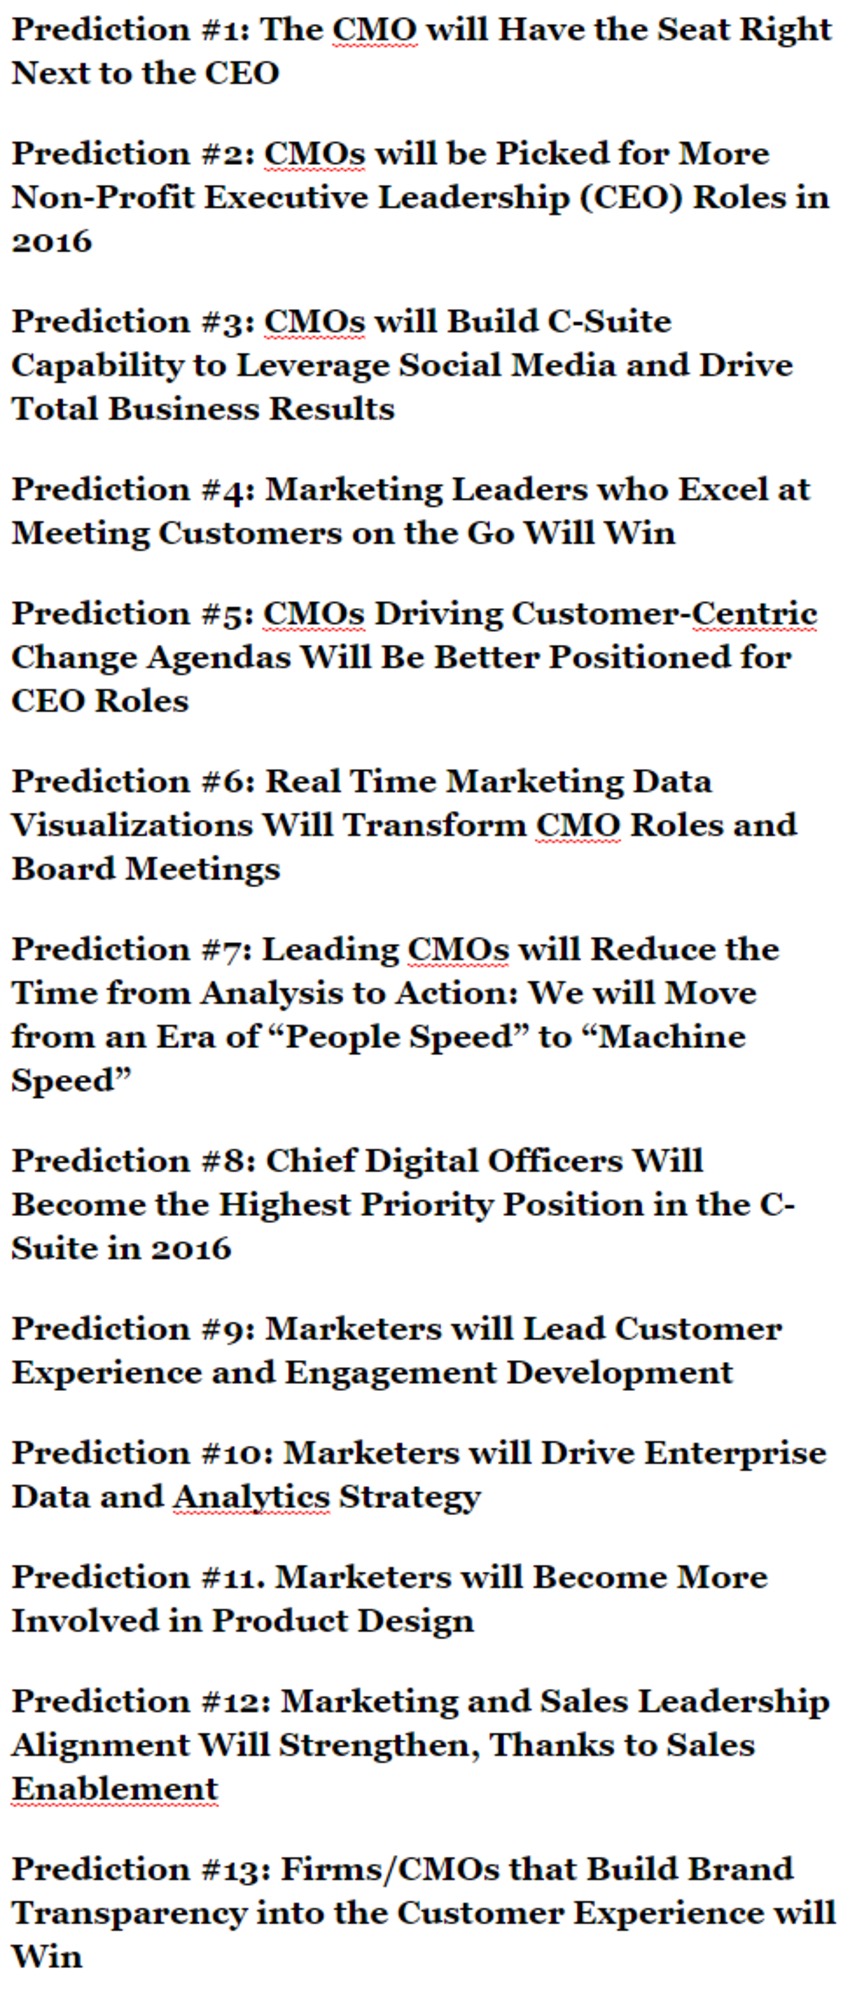 CEOs, CMOs, And Executive Recruiters Make Predictions For Marketing Leaders in 2016 - Forbes | The MarTech Digest | Scoop.it